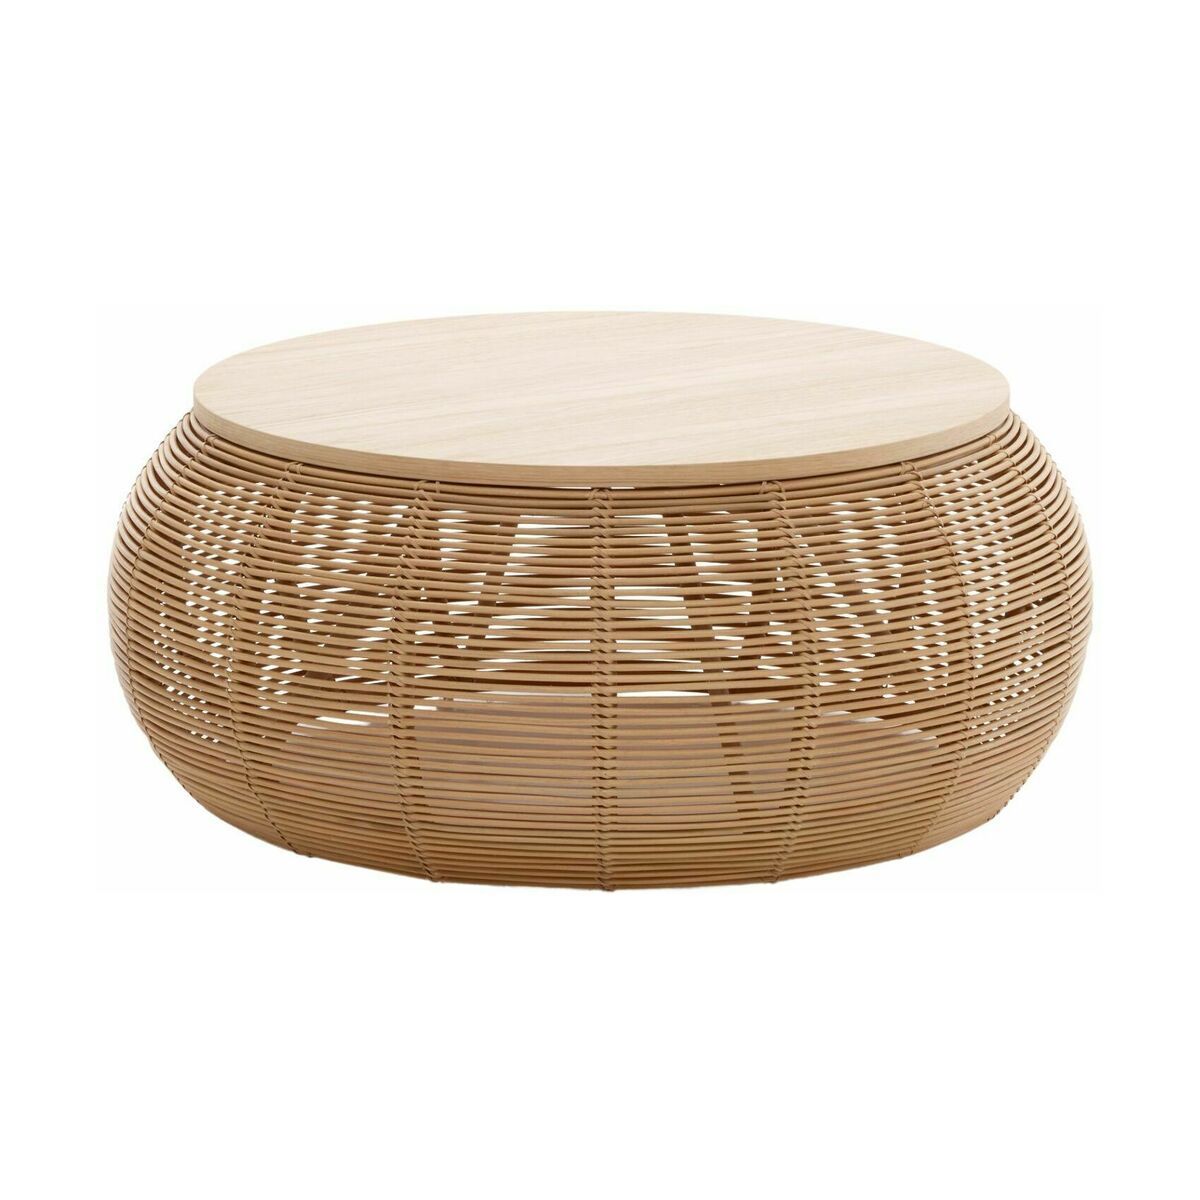 Large Rattan Coffee Table Vivi – Vincent Sheppard With Regard To Rattan Coffee Tables (View 15 of 15)